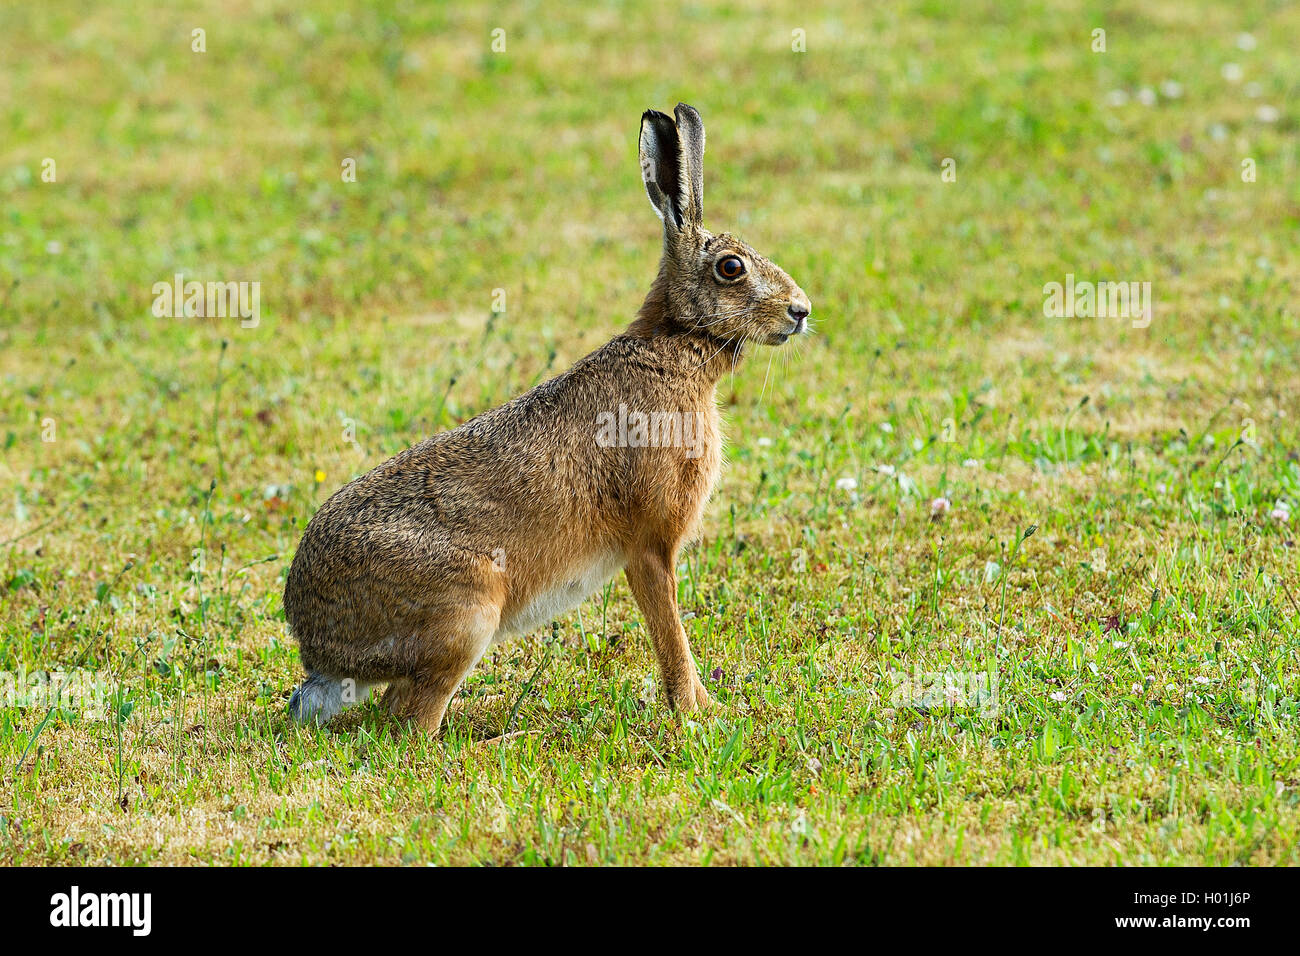 European hare, Brown hare (Lepus europaeus), secures its surroundings for danger, Germany, North Rhine-Westphalia Stock Photo